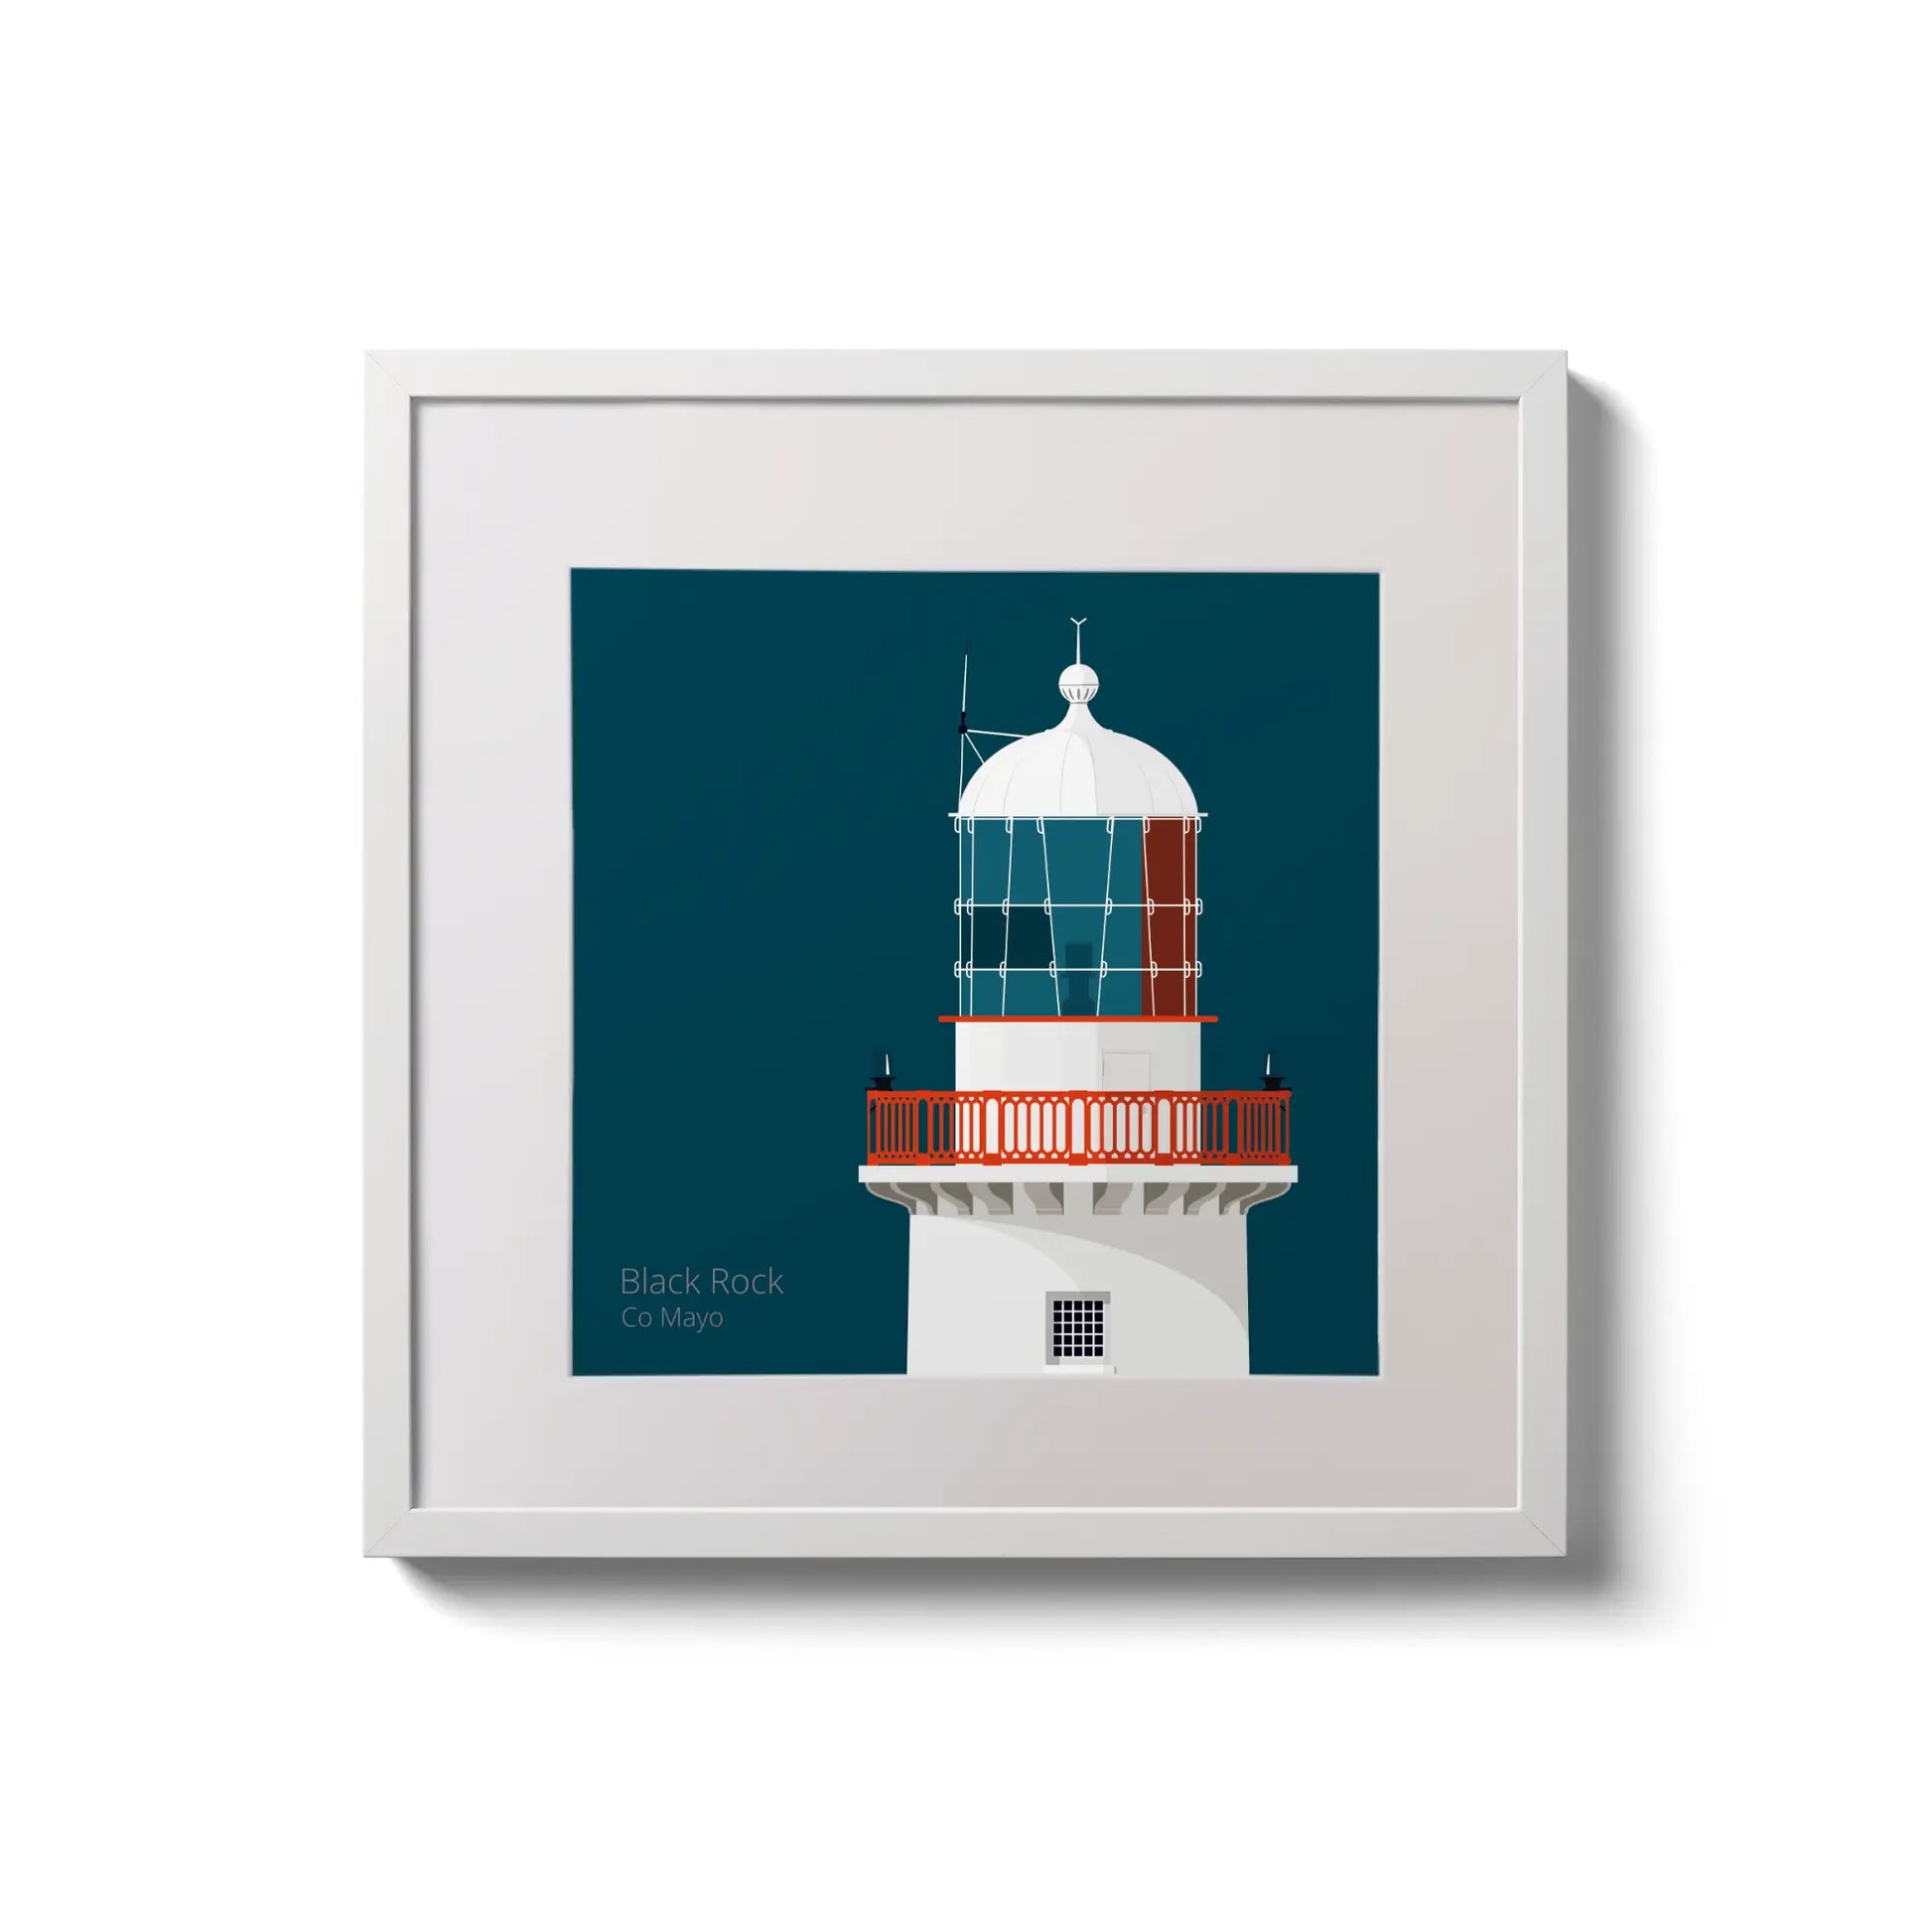 Illustration of Black Rock lighthouse on a midnight blue background,  in a white square frame measuring 20x20cm.